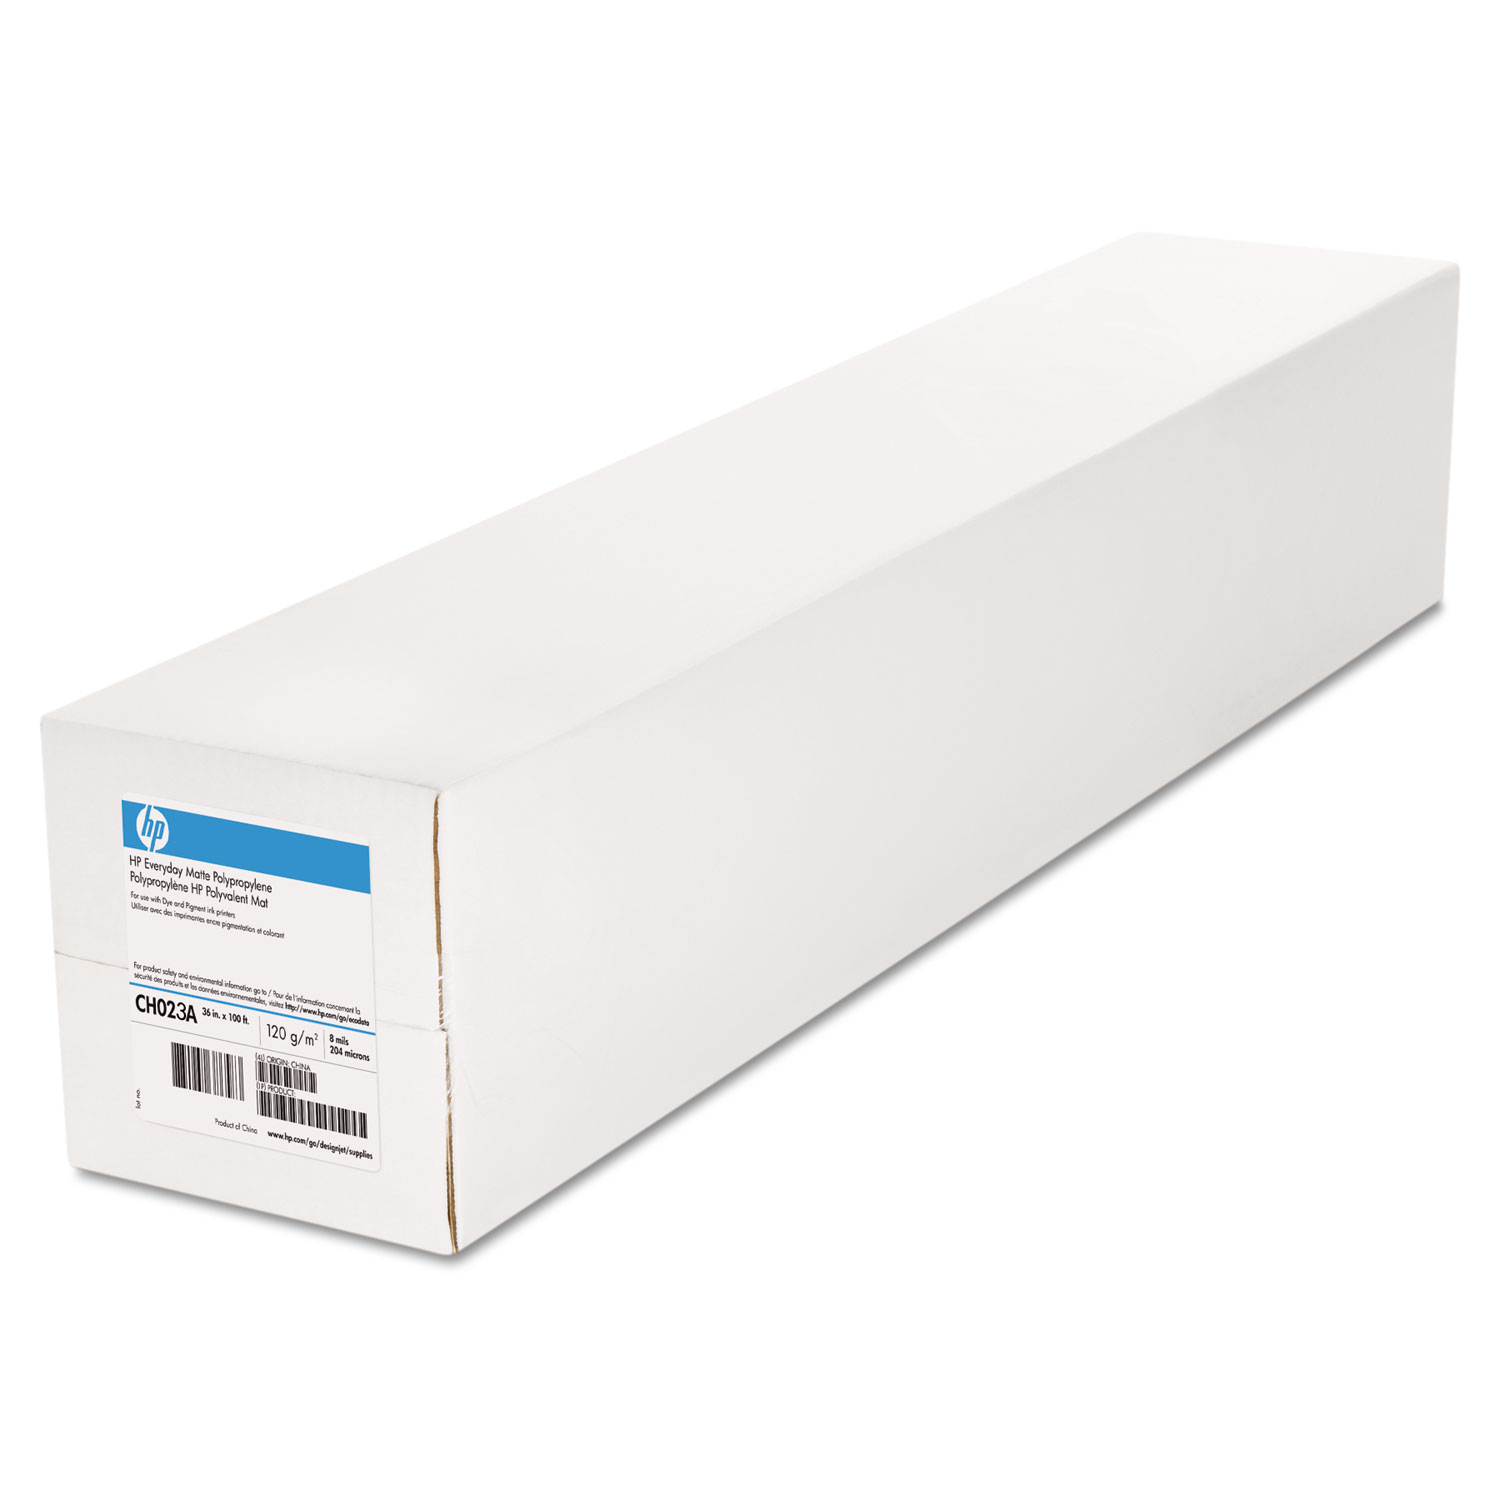  HP CH023A Everyday Matte Polypropylene Roll Film, 2 Core, 8 mil, 36 x 100 ft, White (HEWCH023A) 